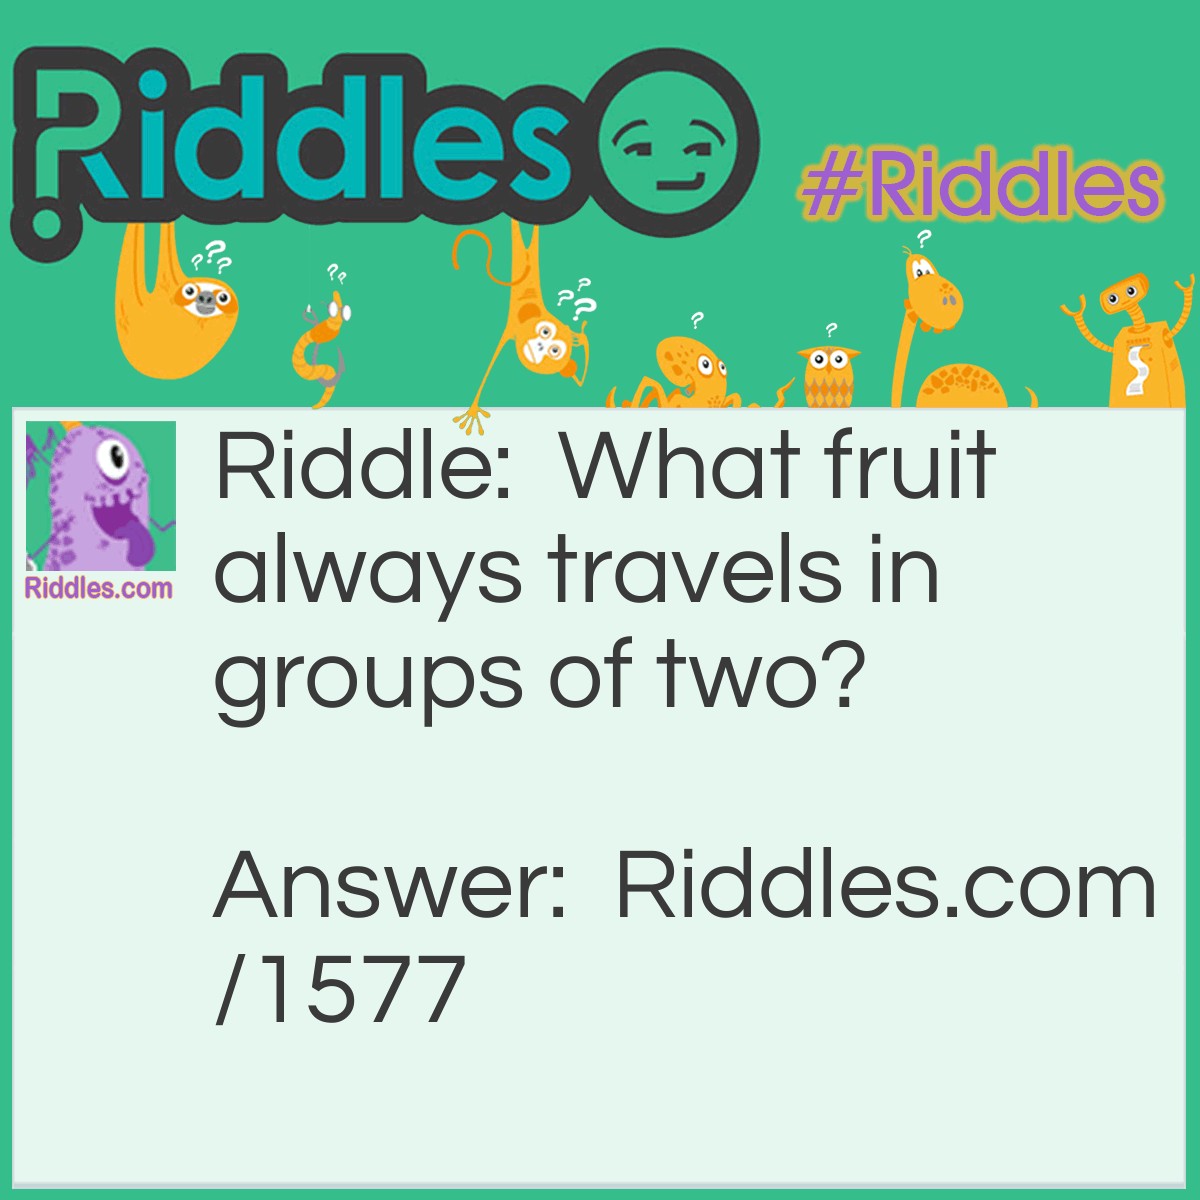 Riddle: What fruit always travels in groups of two? Answer: <p style="padding-left: 30px;">Pears.